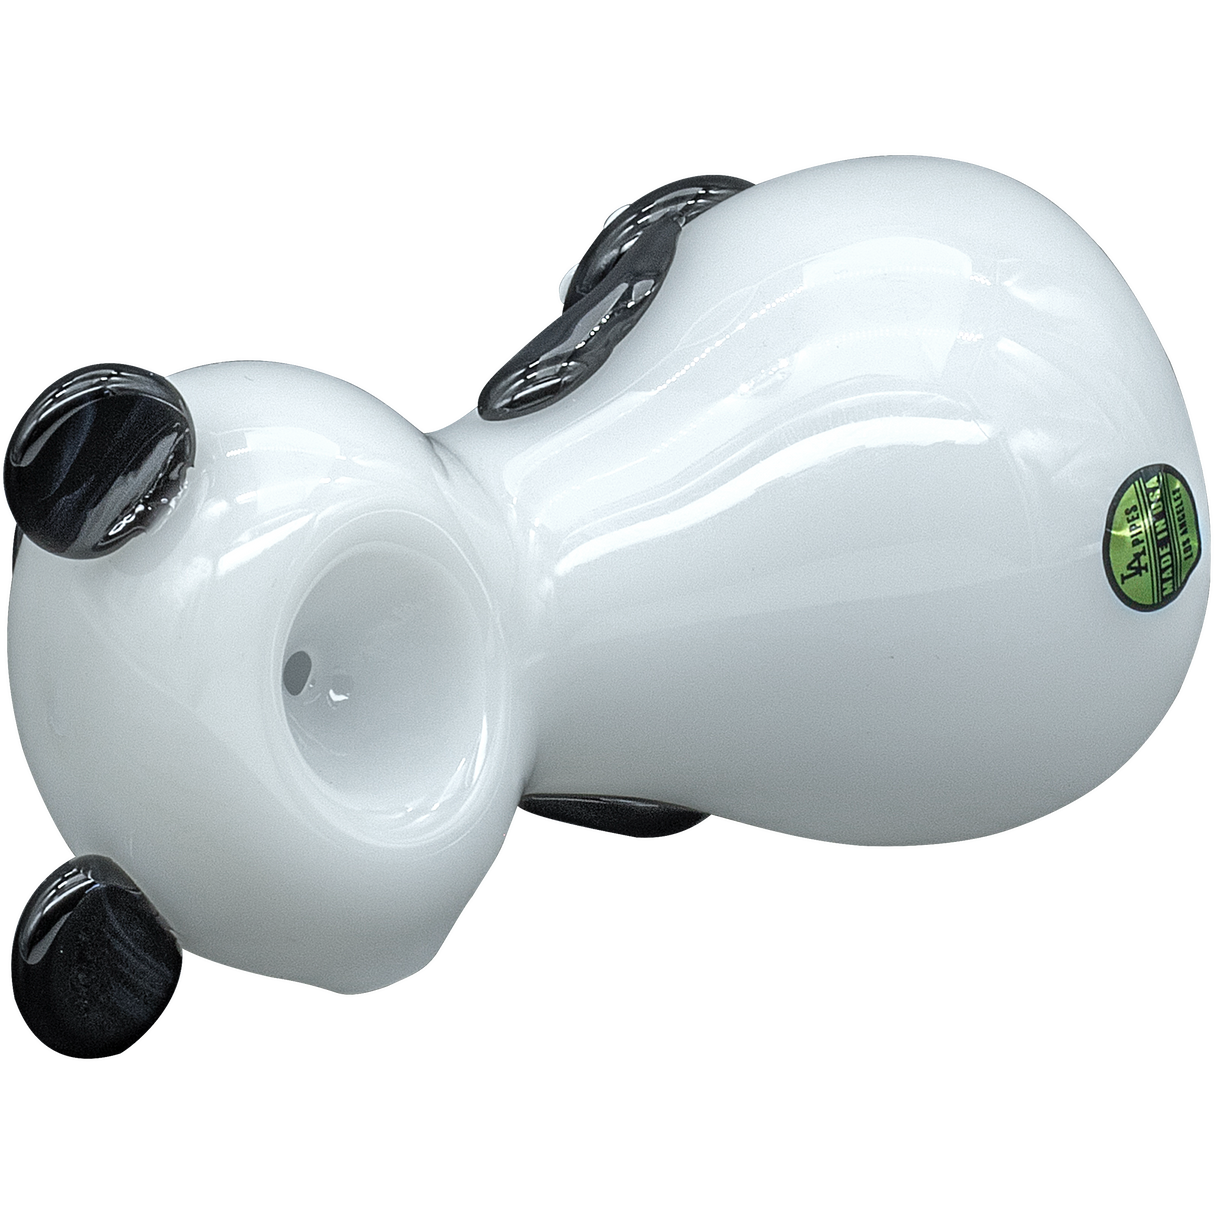 LA Pipes "Bored Panda" Glass Pipe, 4" Spoon Design, for Dry Herbs, Top View